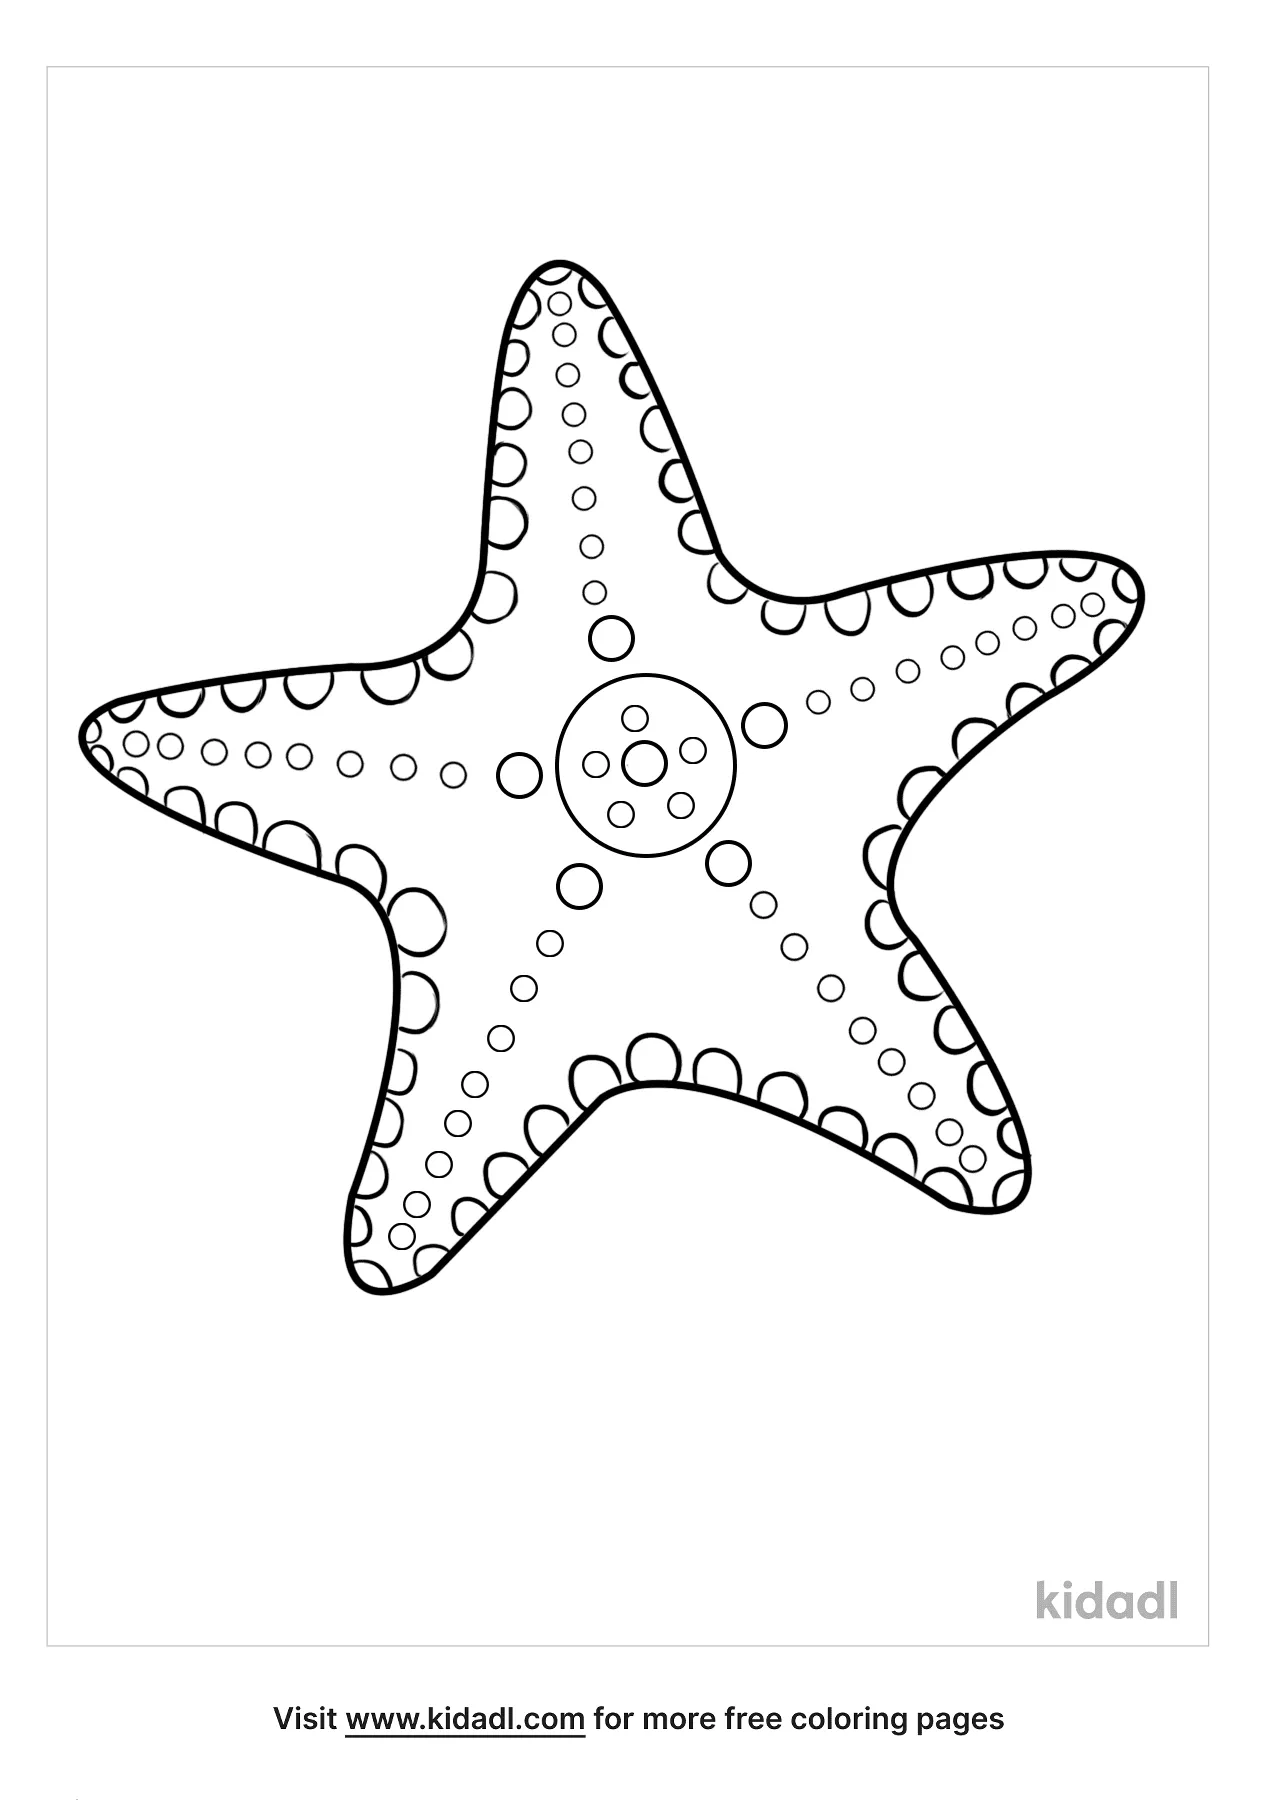 Free starfish coloring page coloring page printables